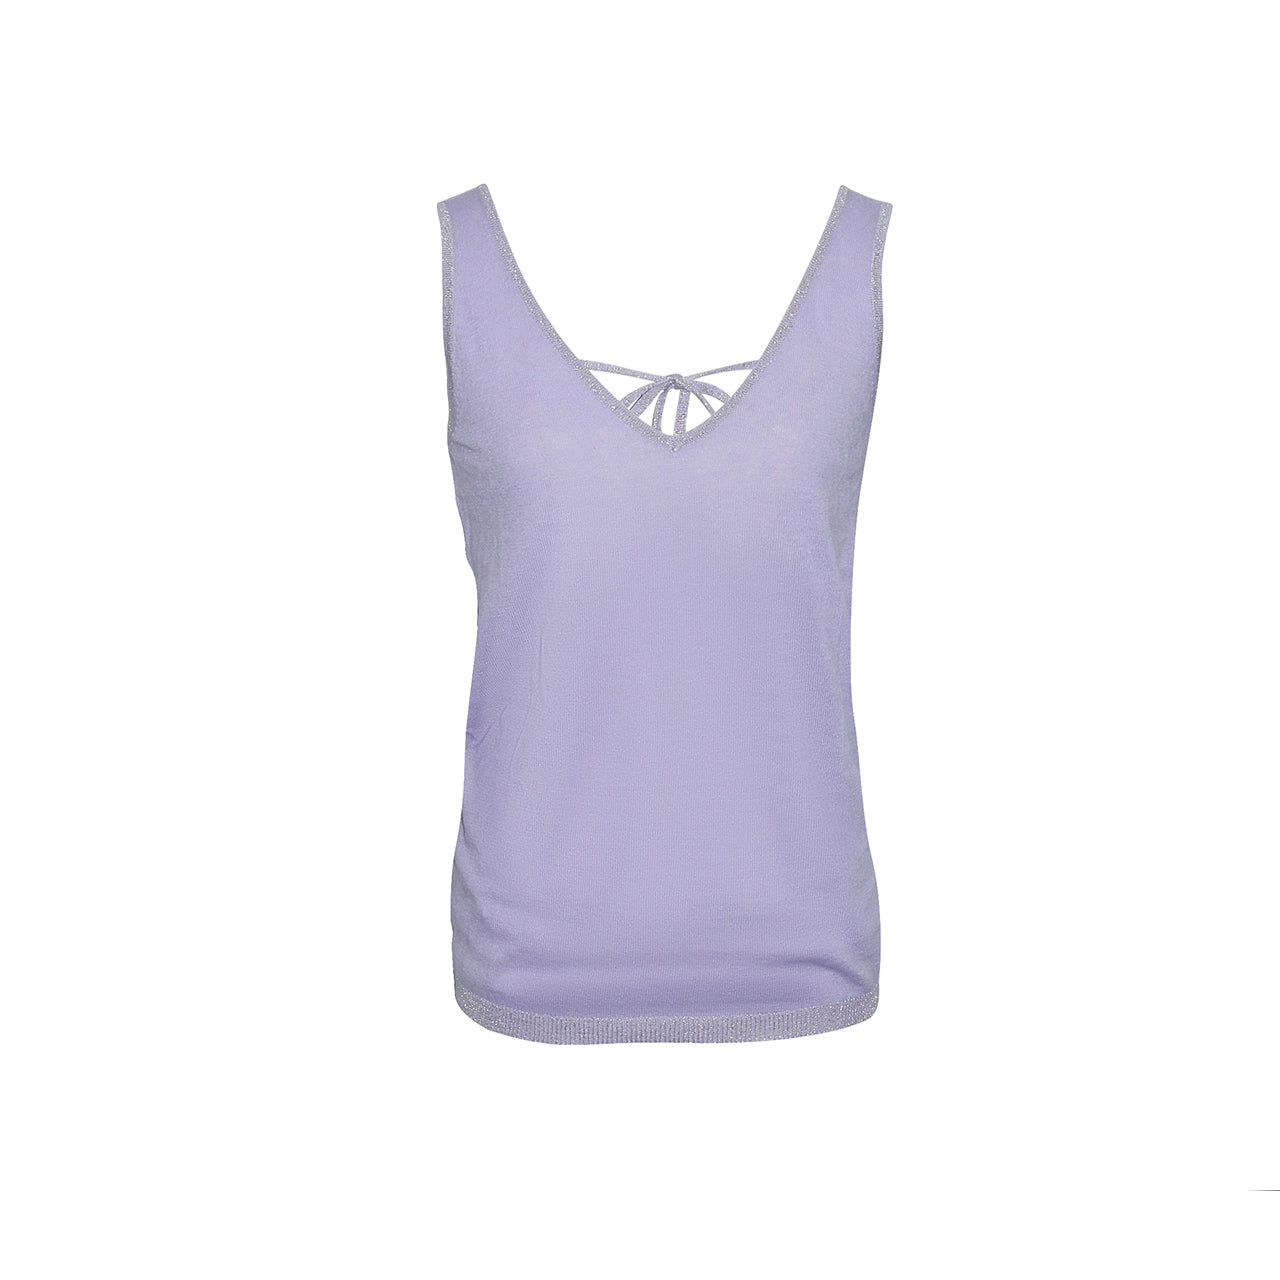 Shop the Trendy GINA Knit Tie-Up Tank Today